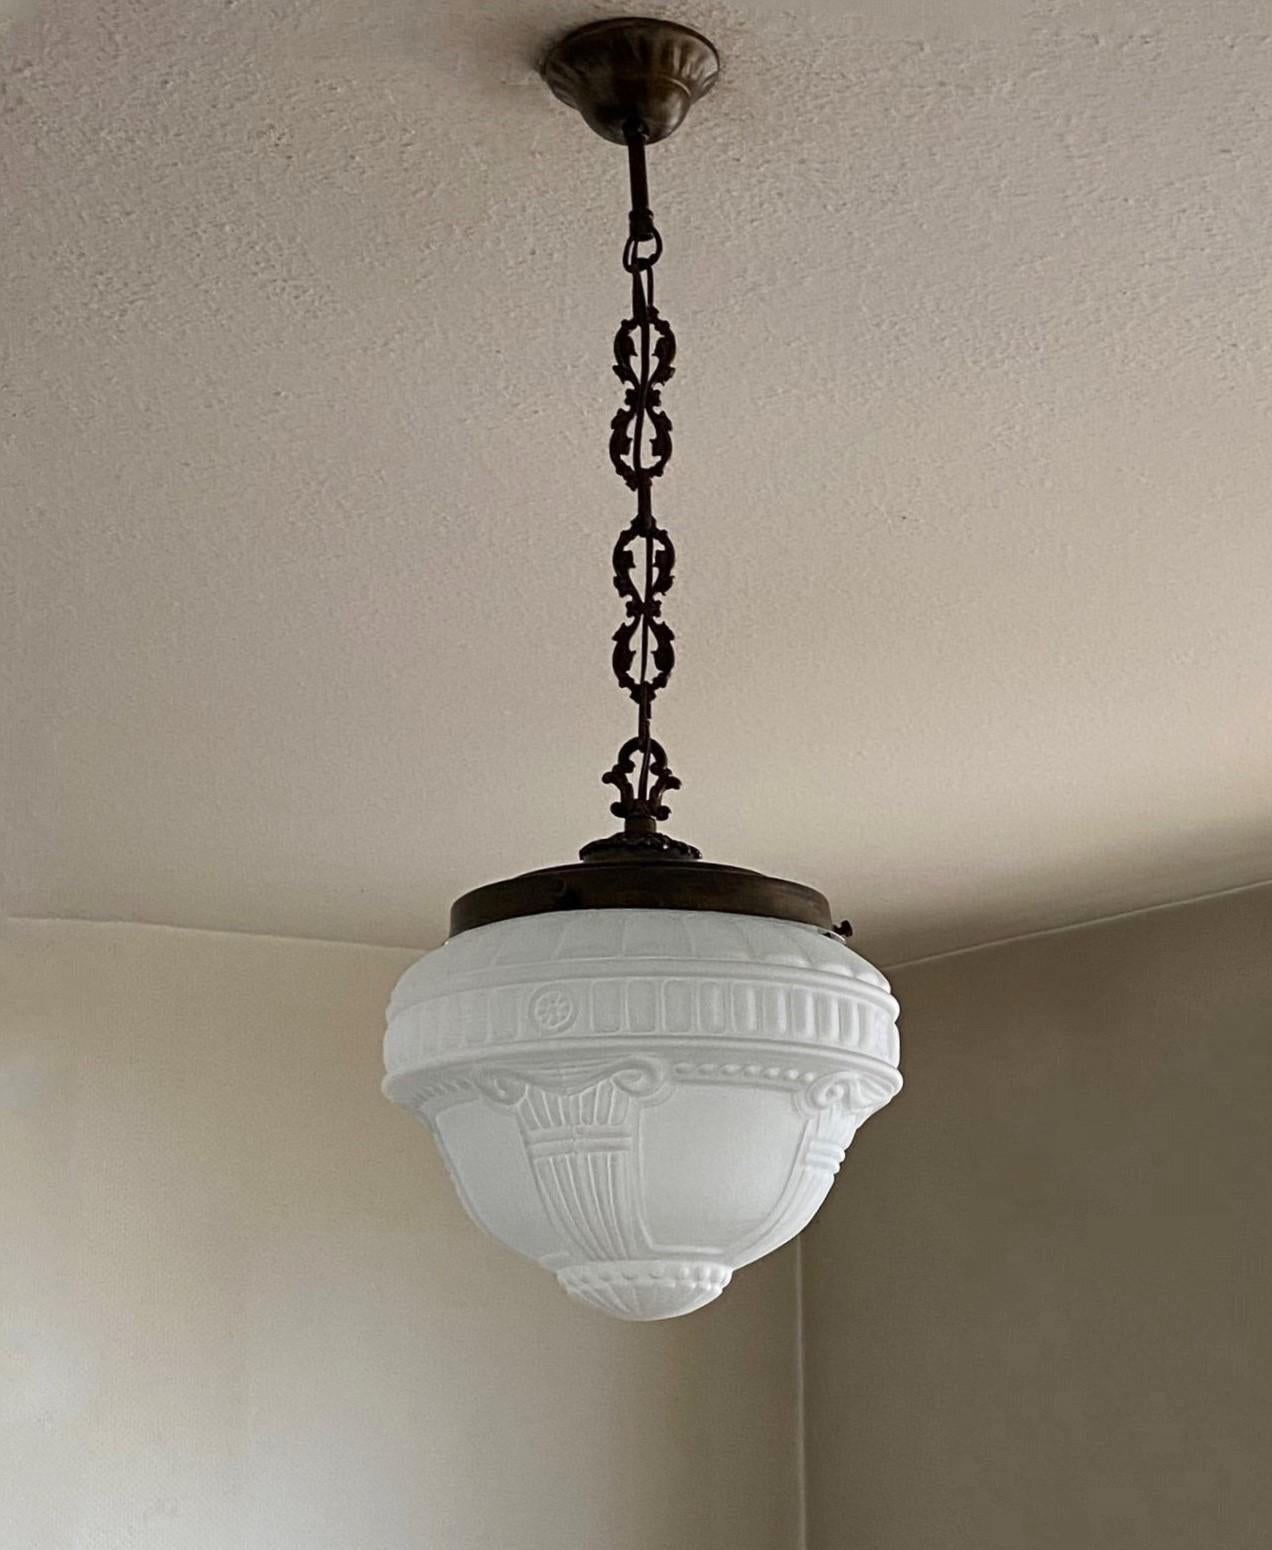 An elegant Art Deco  high relief glass pendant, light fixture, France 1920-1929, frosted glass globe with beautiful detailing, patinated brass mounts. In Fine vintage condition, glass without damages, newly rewired. It takes 1 Edison E27 screw bulb